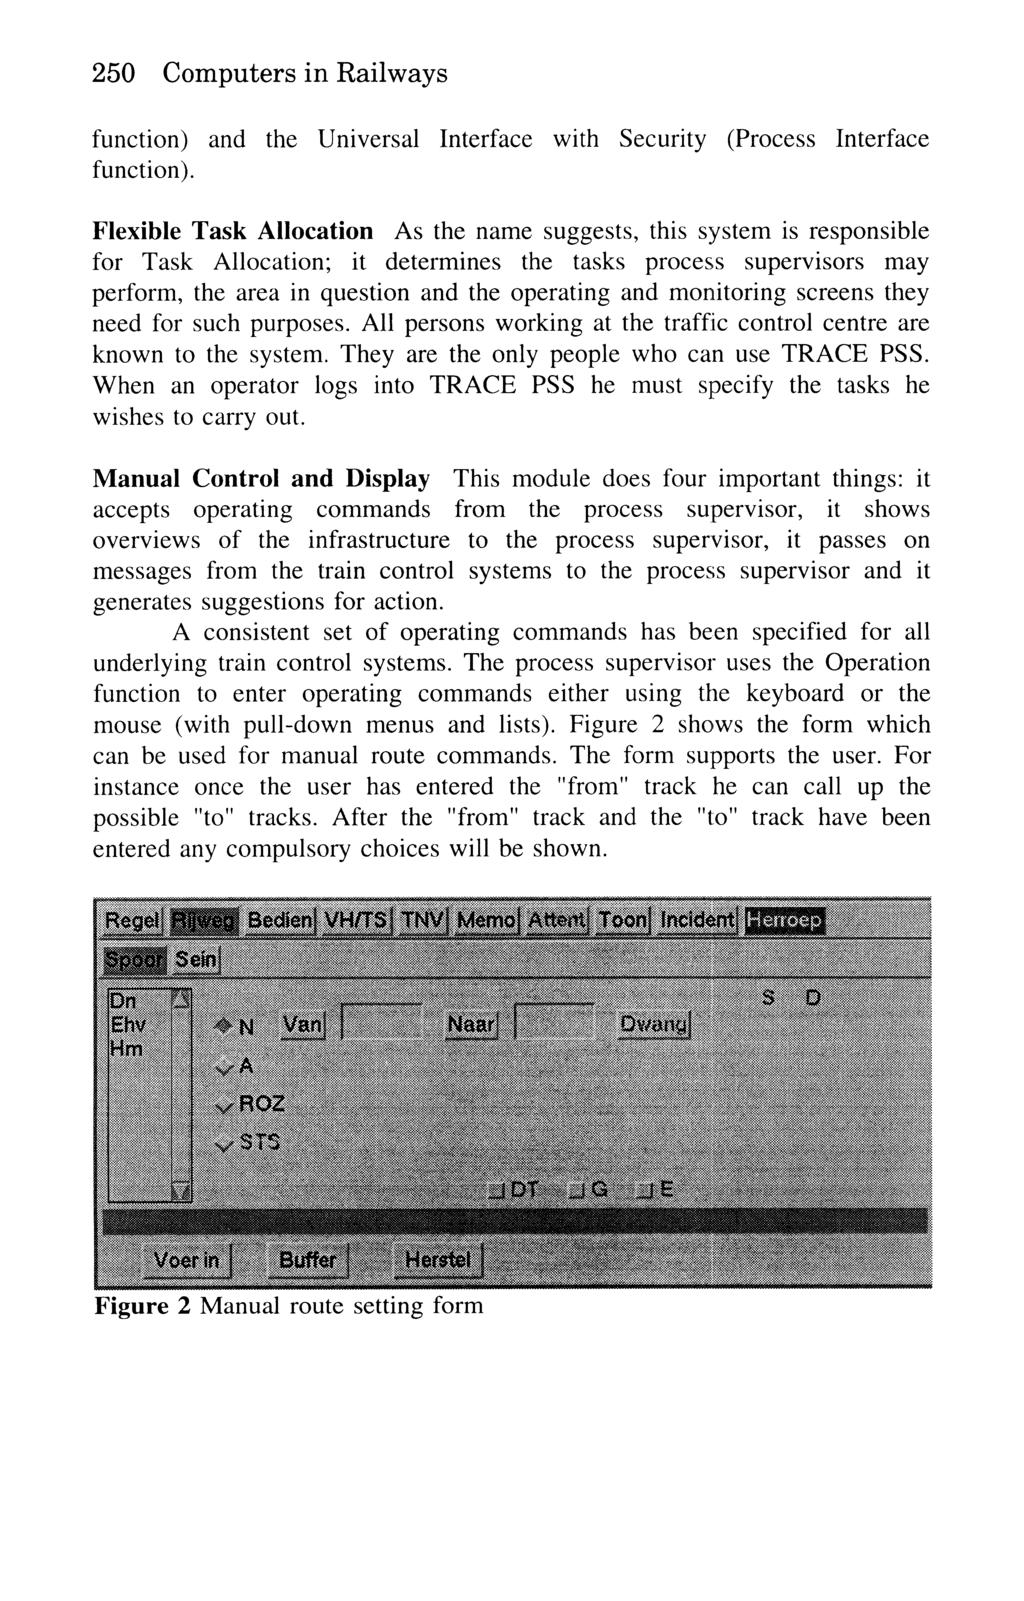 250 Computers in Railways function) and the Universal Interface with Security (Process Interface function).